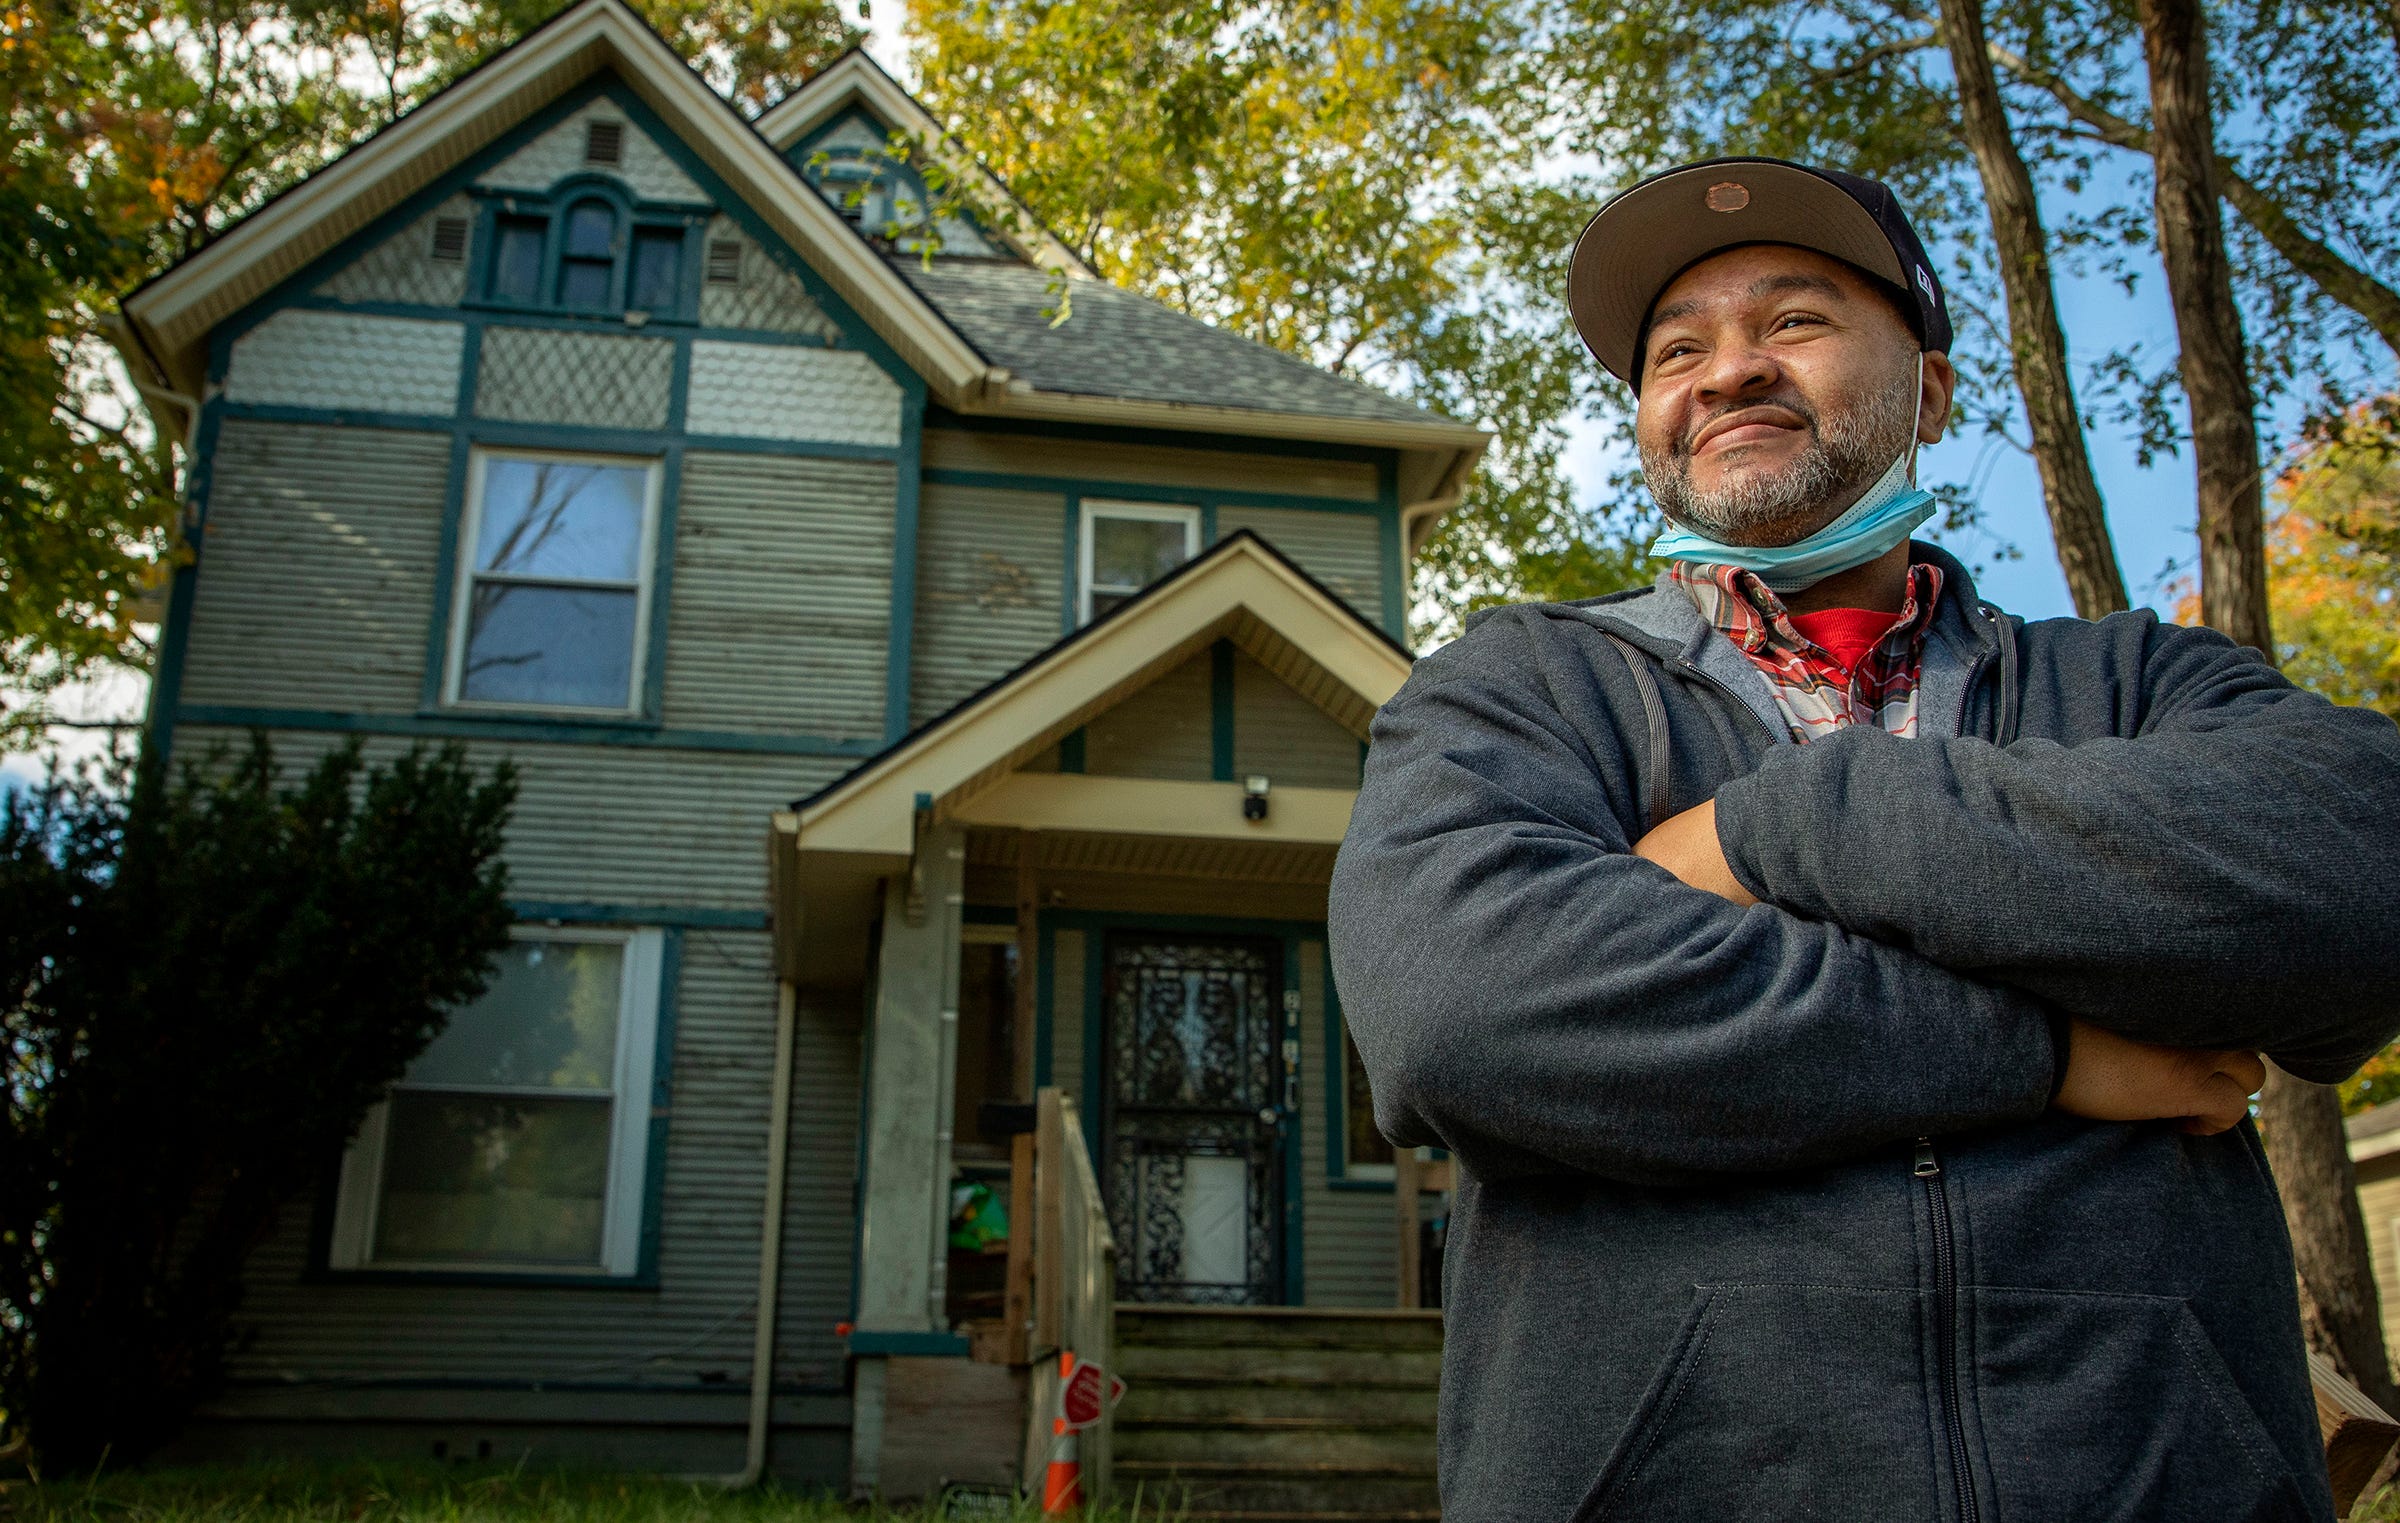 Nathan Smith, of Benton Harbor, talks about the water situation in Benton Harbor in front of his Colfax Avenue home on October 26, 2021. Smith has a rather large social media following and a lot of the community discussion of the dissatisfaction with this contamination and government's response to it has occurred via his posts. Recently, Gov. Whitmer has called for spending $20 million in Benton Harbor to replace nearly 6,000 service lines, most suspected of containing lead, within five years.